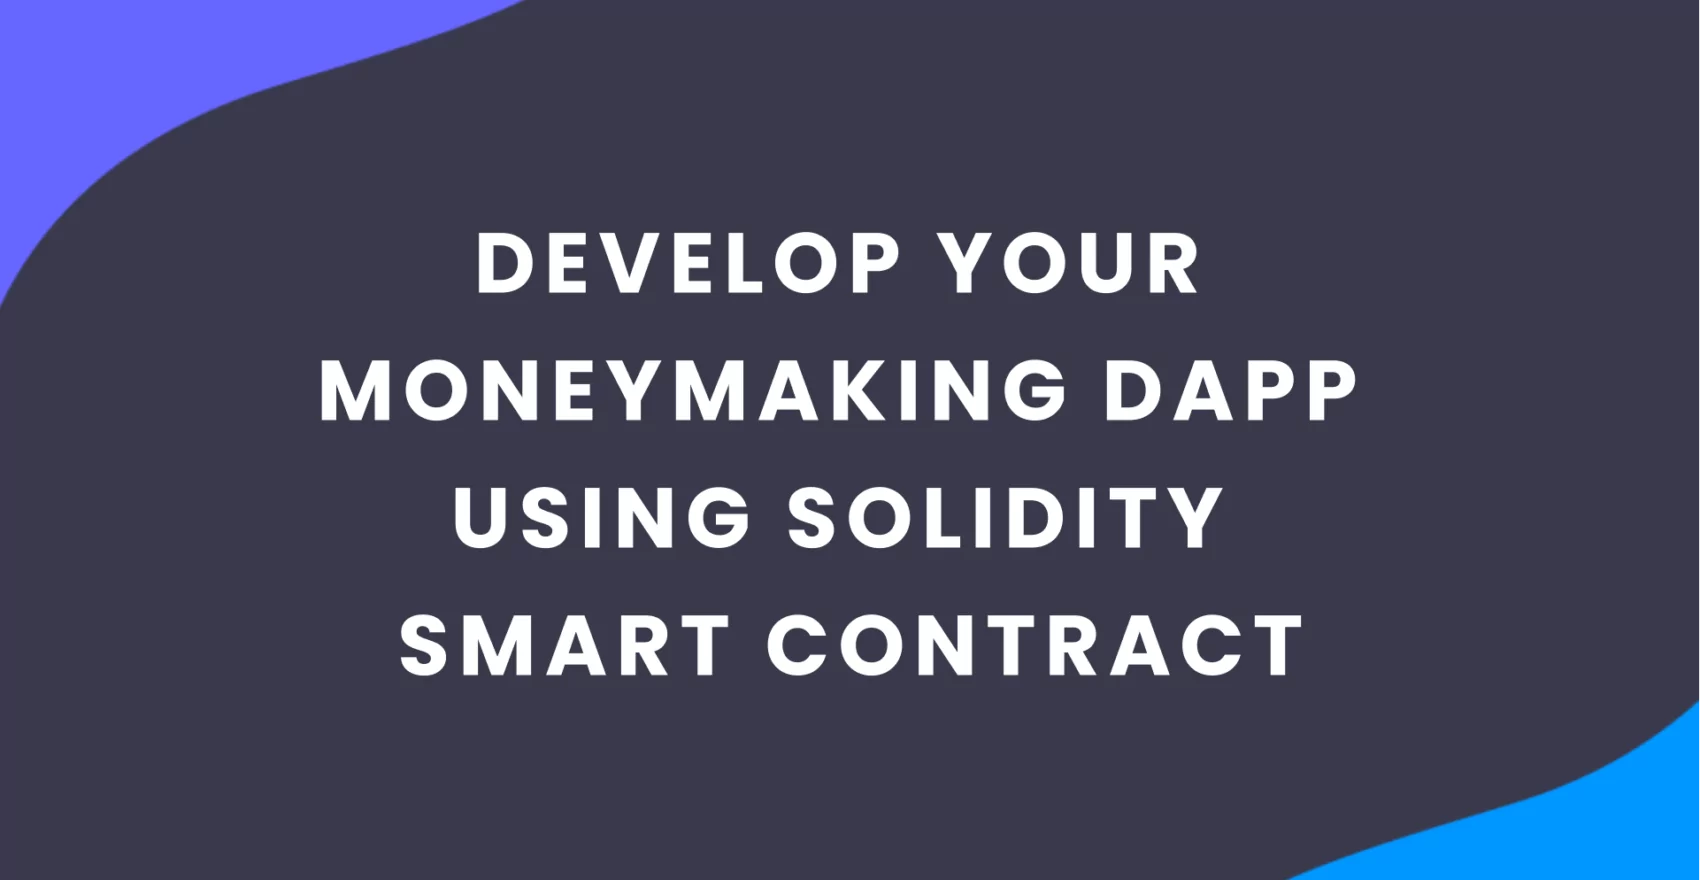 How to Develop Your Moneymaking Dapp Using Solidity Smart Contract: Step-by-Step Guide